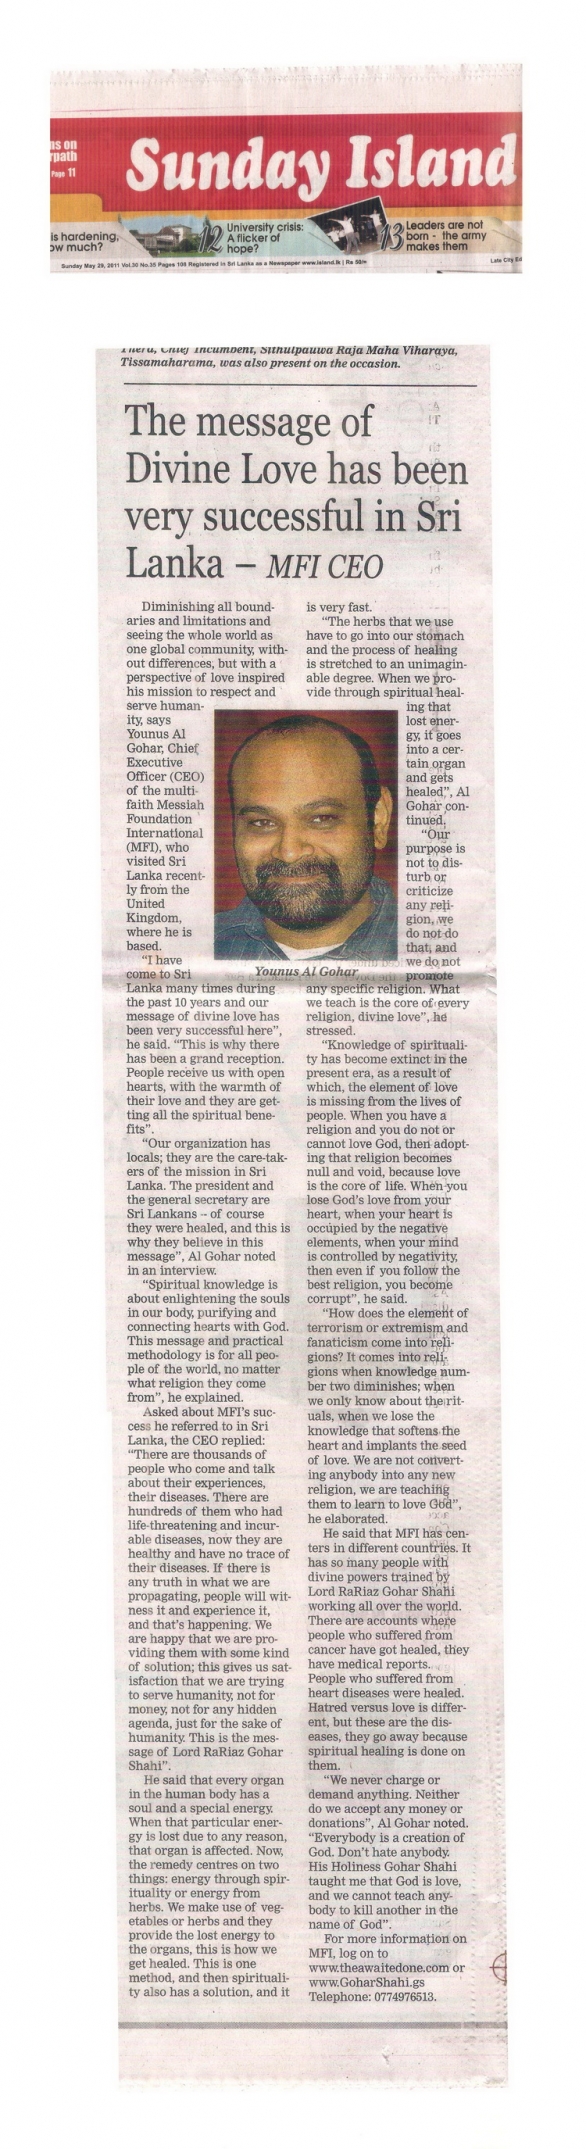 The Sunday Island publishes an interview with His Holiness Younus AlGohar.